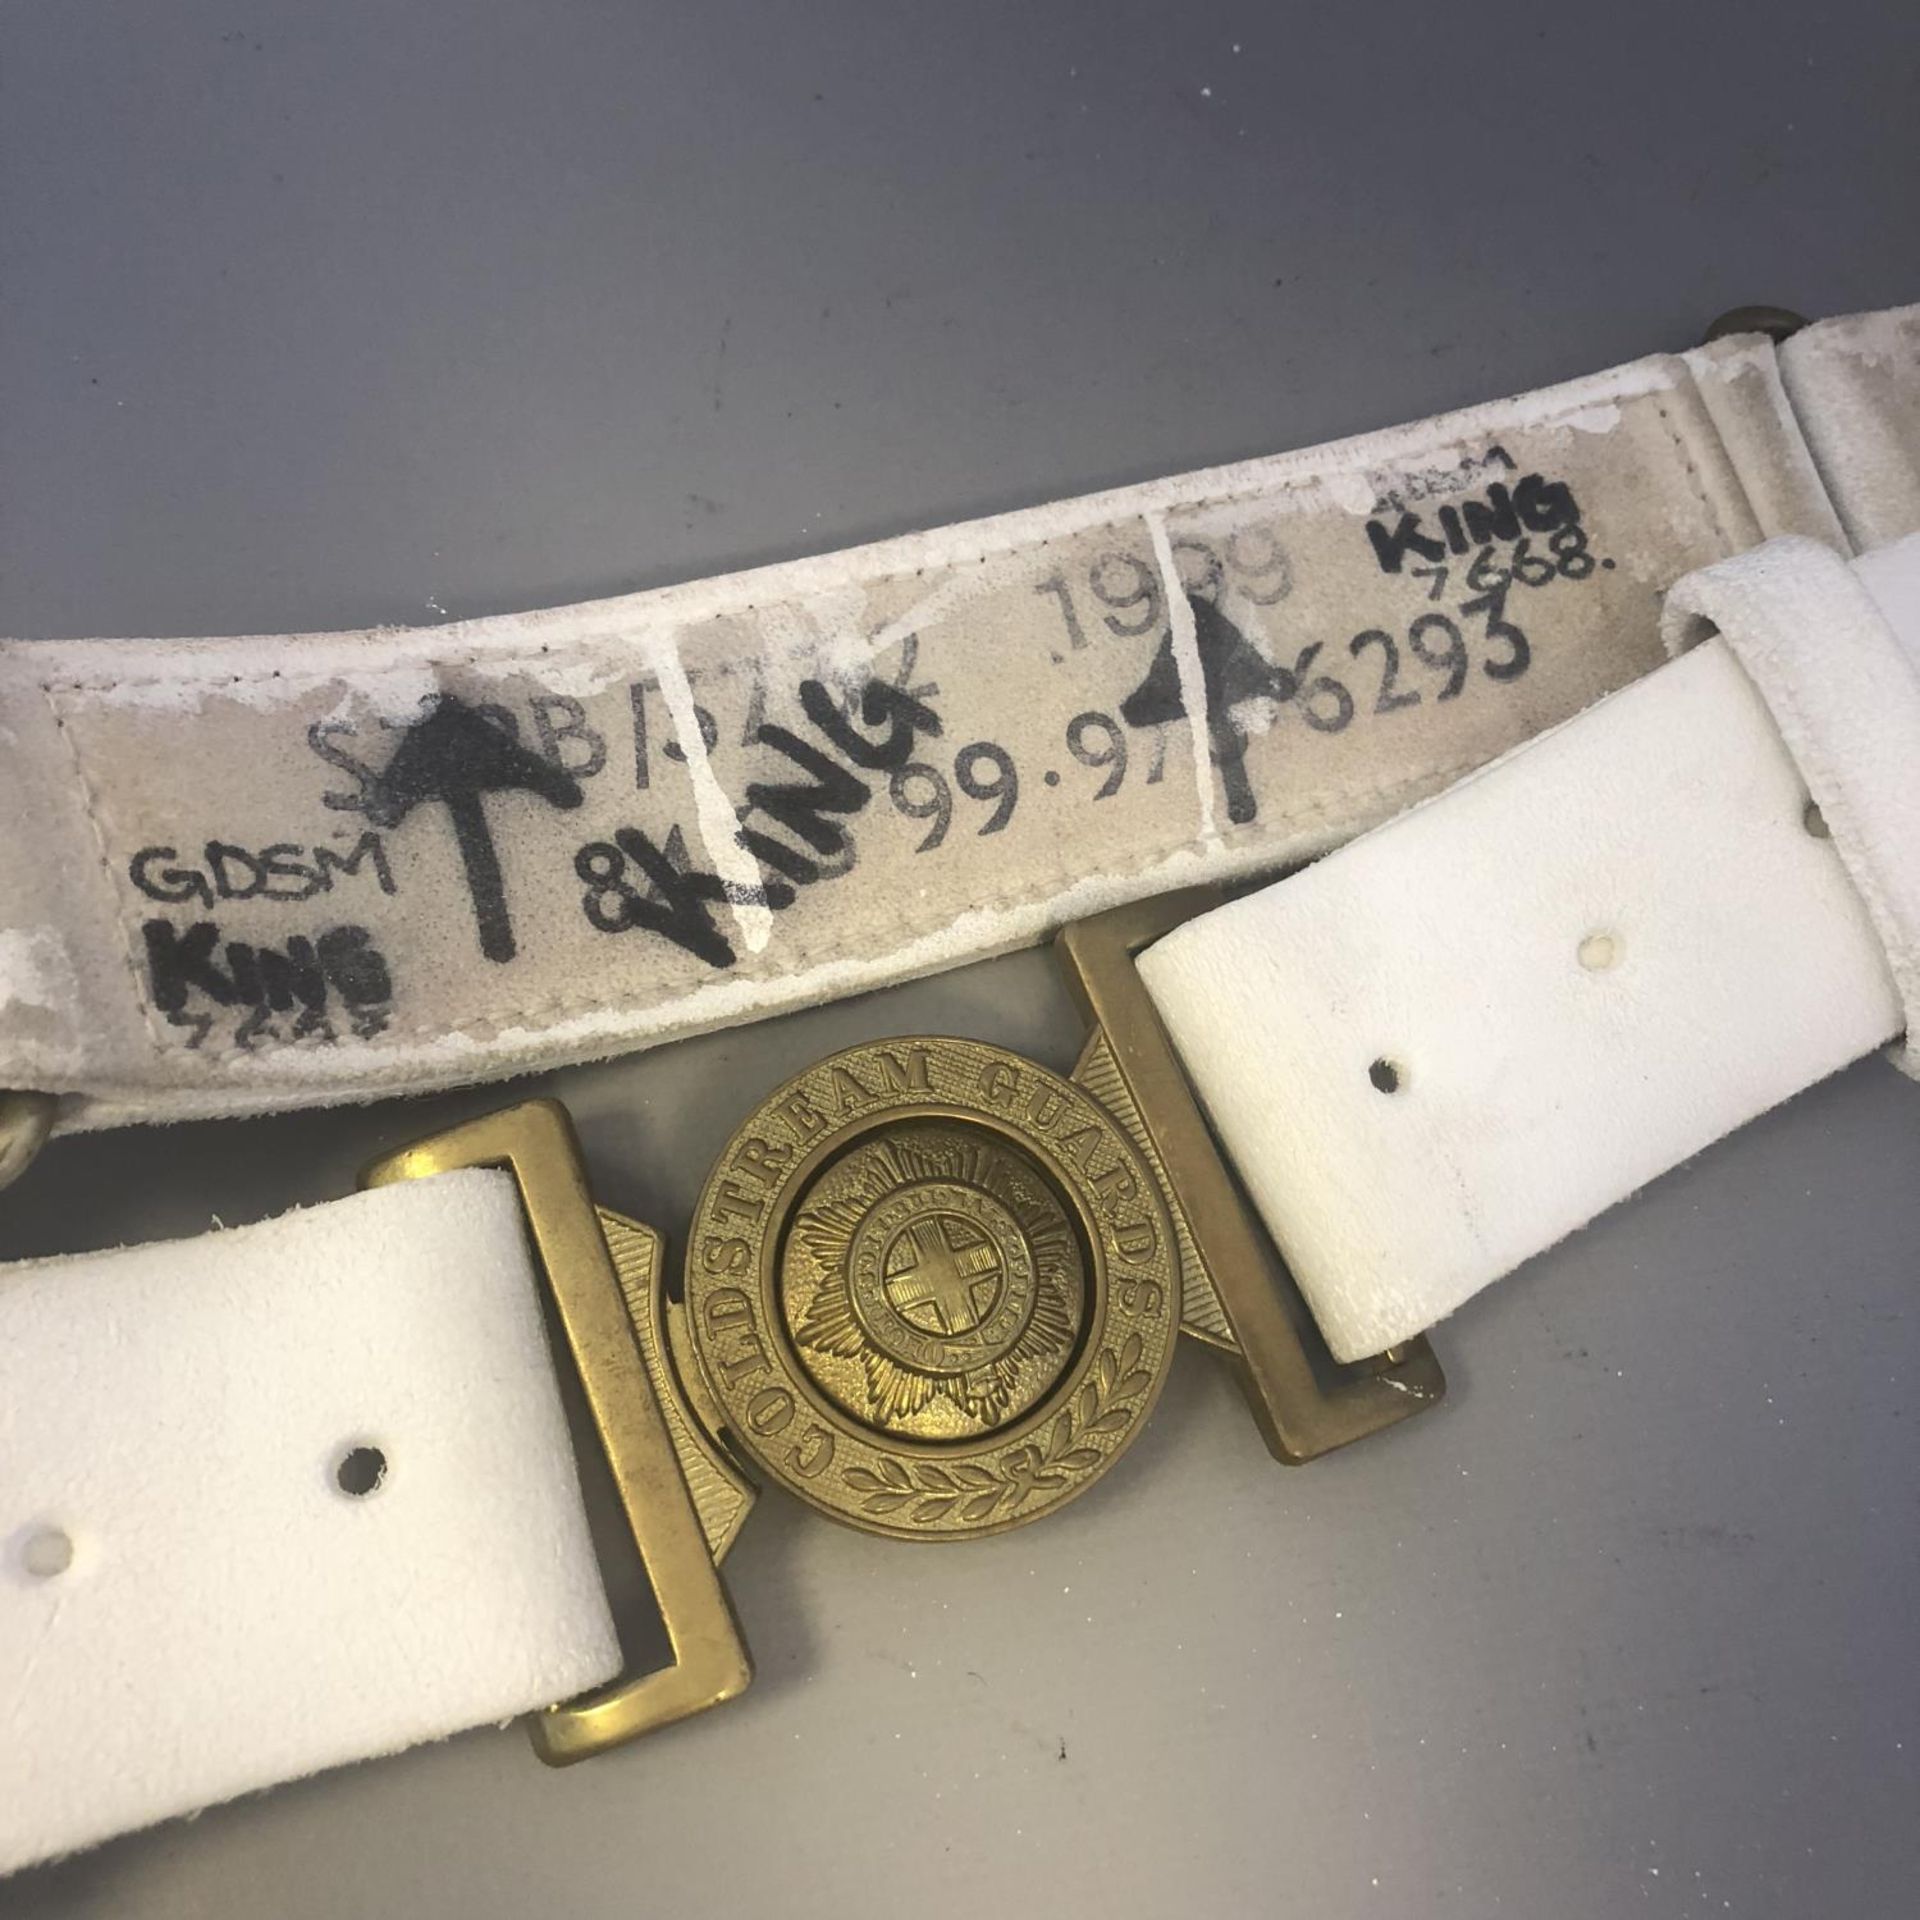 Used Military Uniform - Coldstream Guards White Leather Belt with Brass Buckle - Image 2 of 4